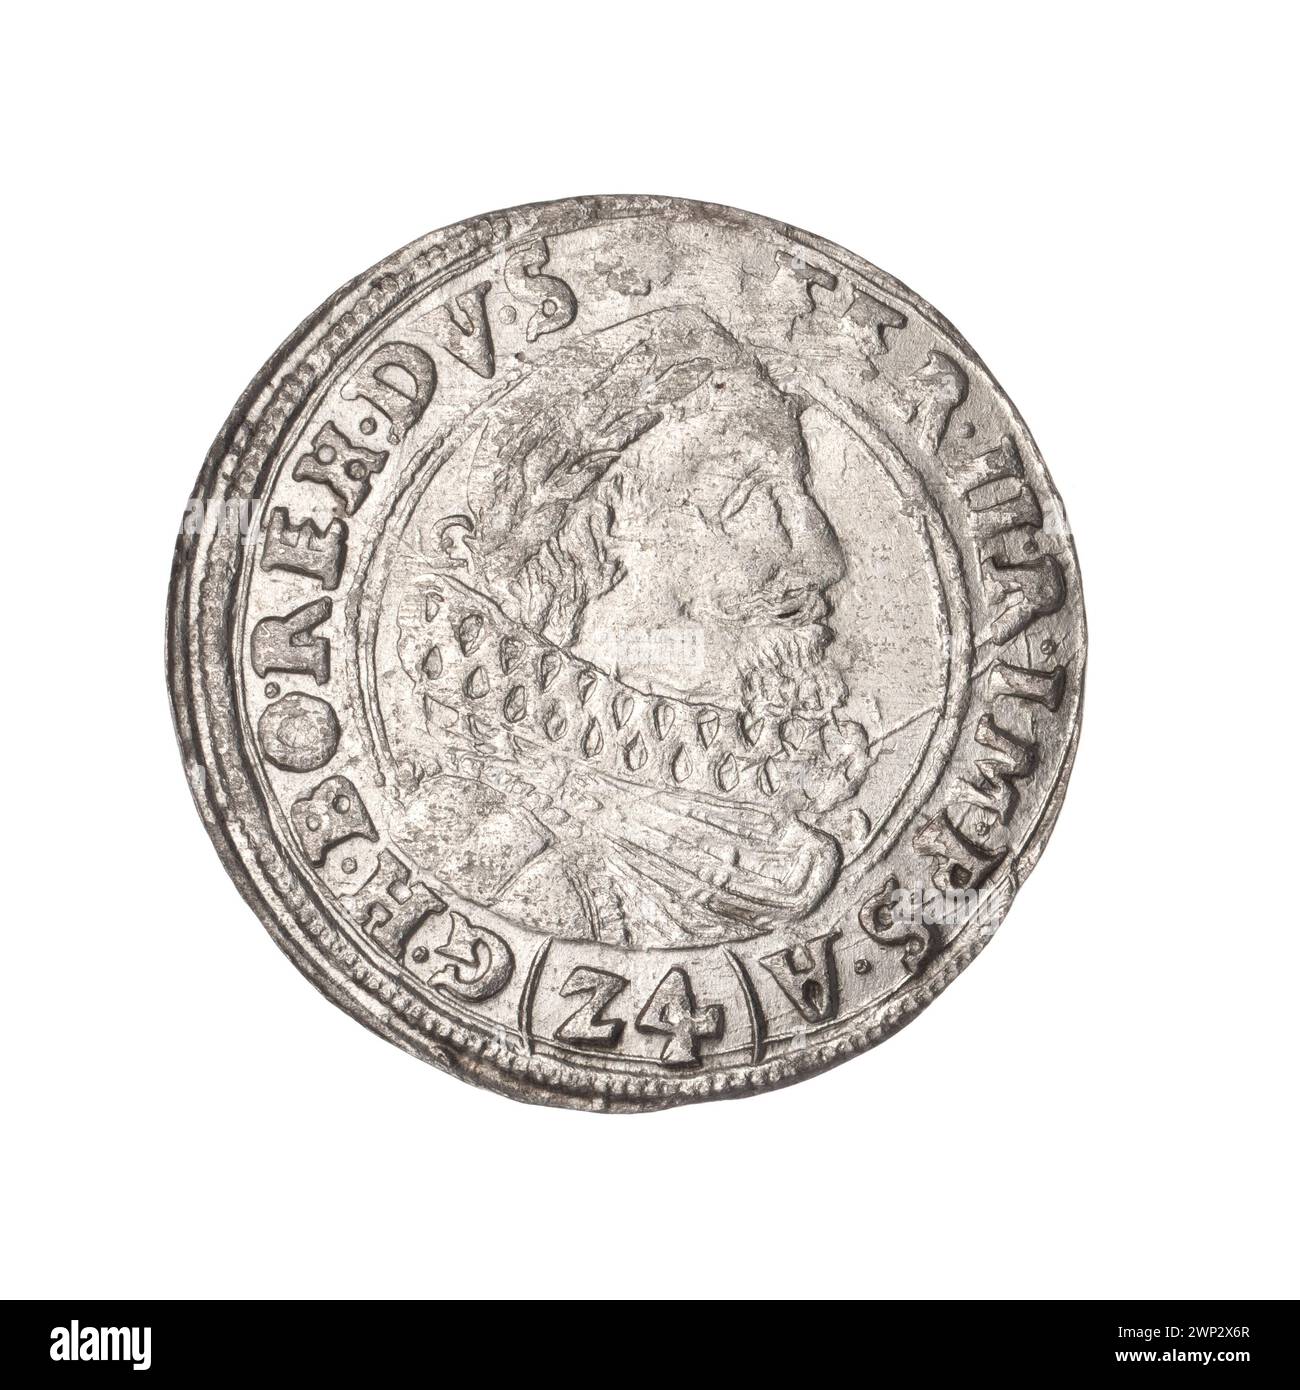 24 Krajcary; Ferdynand II Habsburg (Roman-German emperor; 1617-1637); 1622 (1622-00-00-1622-00-00);Ferdinand II (Roman -German emperor - 1617-1637), Ferdinand II (Roman -German emperor - 1617-1637) - iconography, Habsburg (family), letters, letters D - a, A, city coins, Silesian eagle (iconogr.), Eagles, bust, men's bust, male bust in the Kerza, men's bust in the laurel wreath, ruler's bust, male portrait to the right, portraits, portraits of rulers Stock Photo